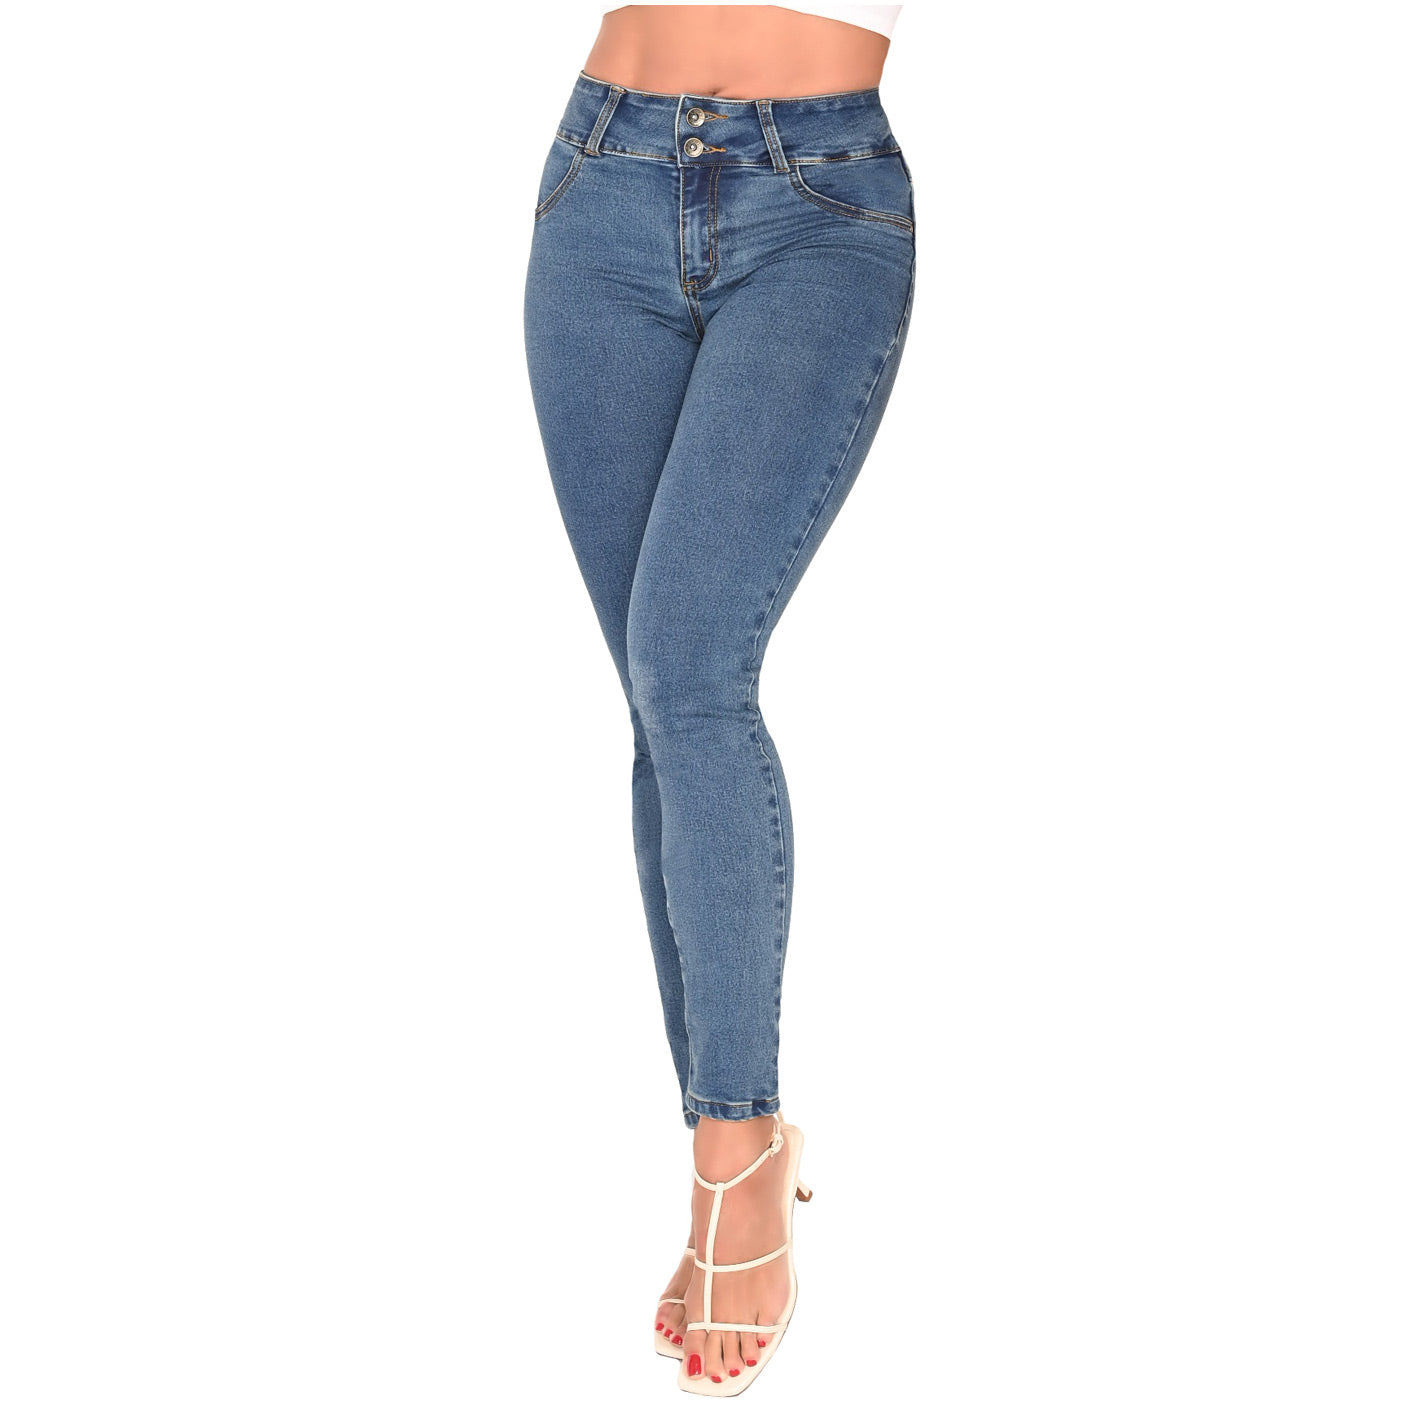 LOWLA 217988| Colombian Jeans | Butt Lift Jeans | Chica Sexy